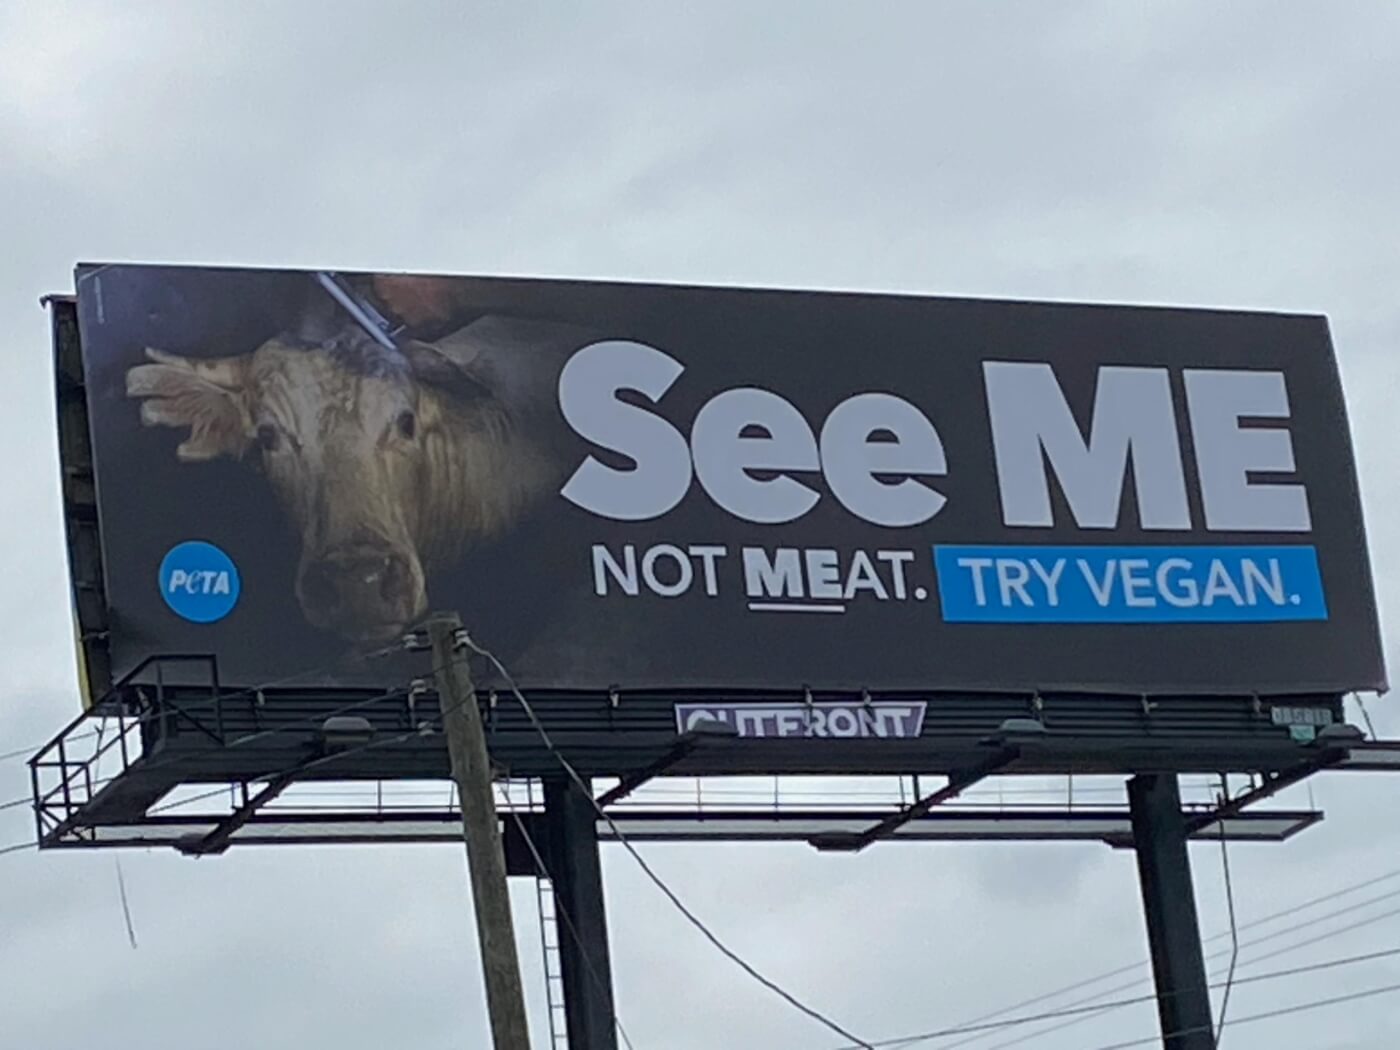 sad looking cow on a billboard that says "see me not meat" 